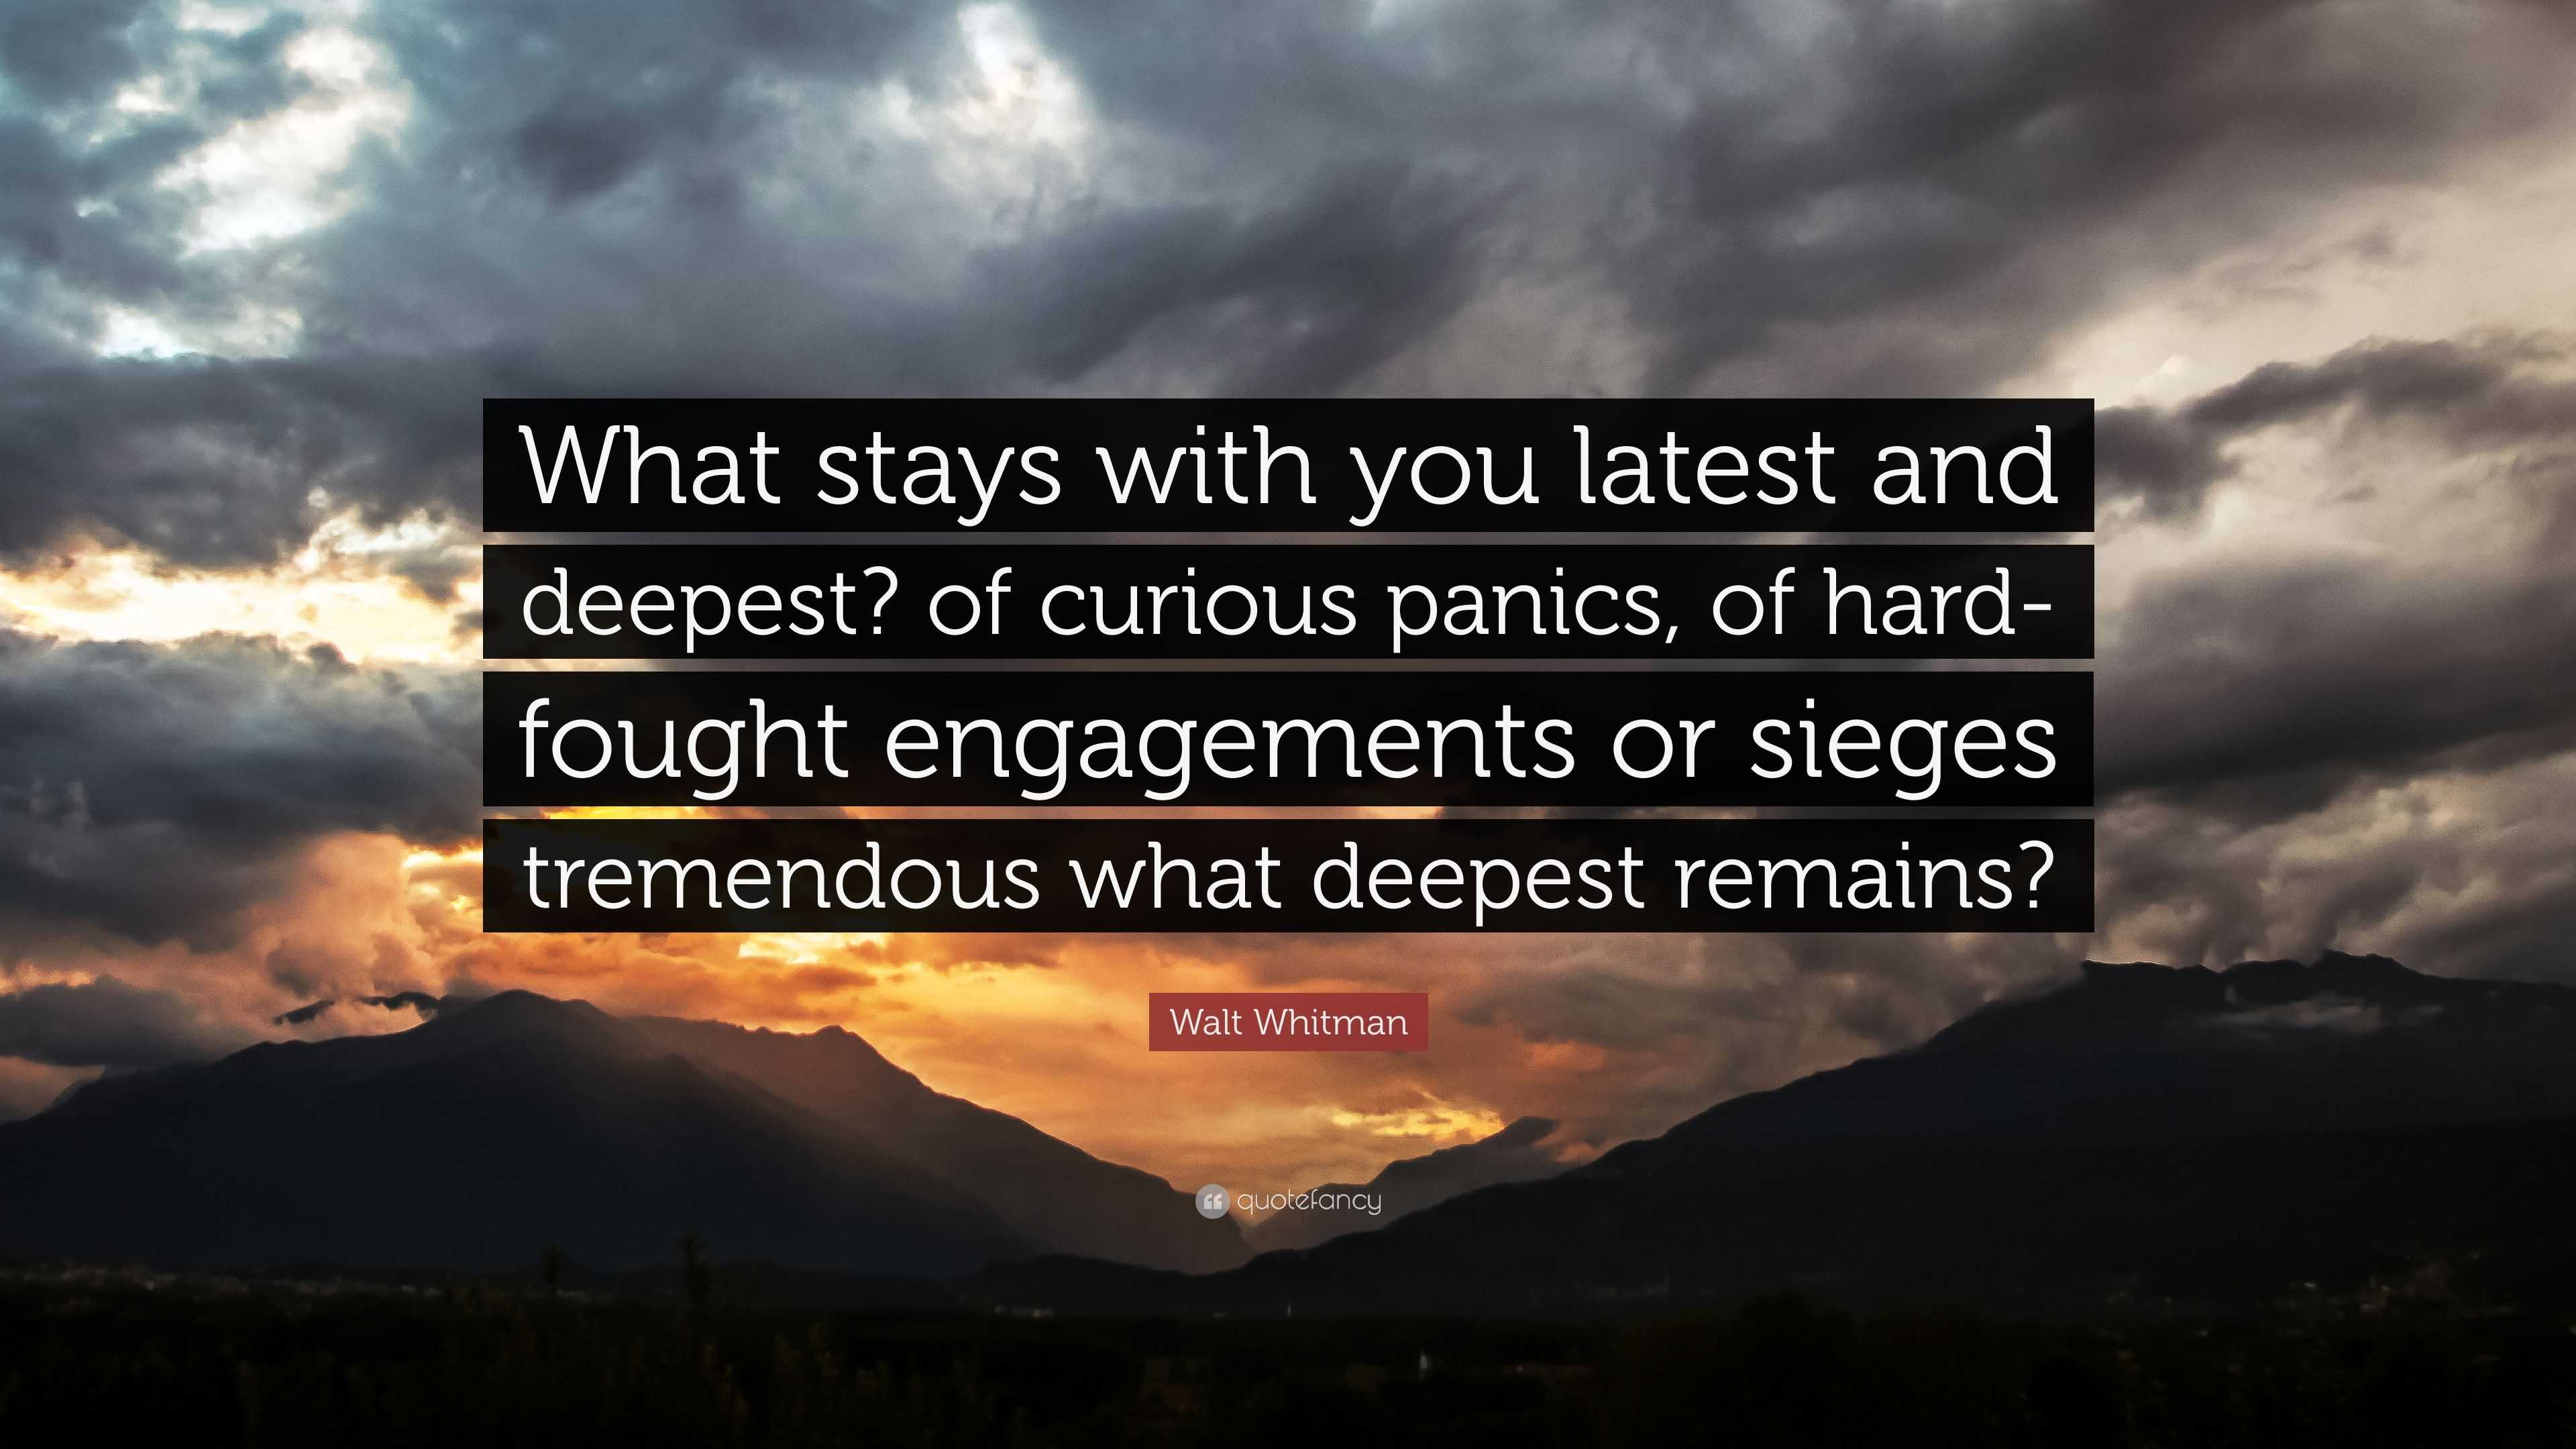 Walt Whitman Quote: “What stays with you latest and deepest? of curious ...